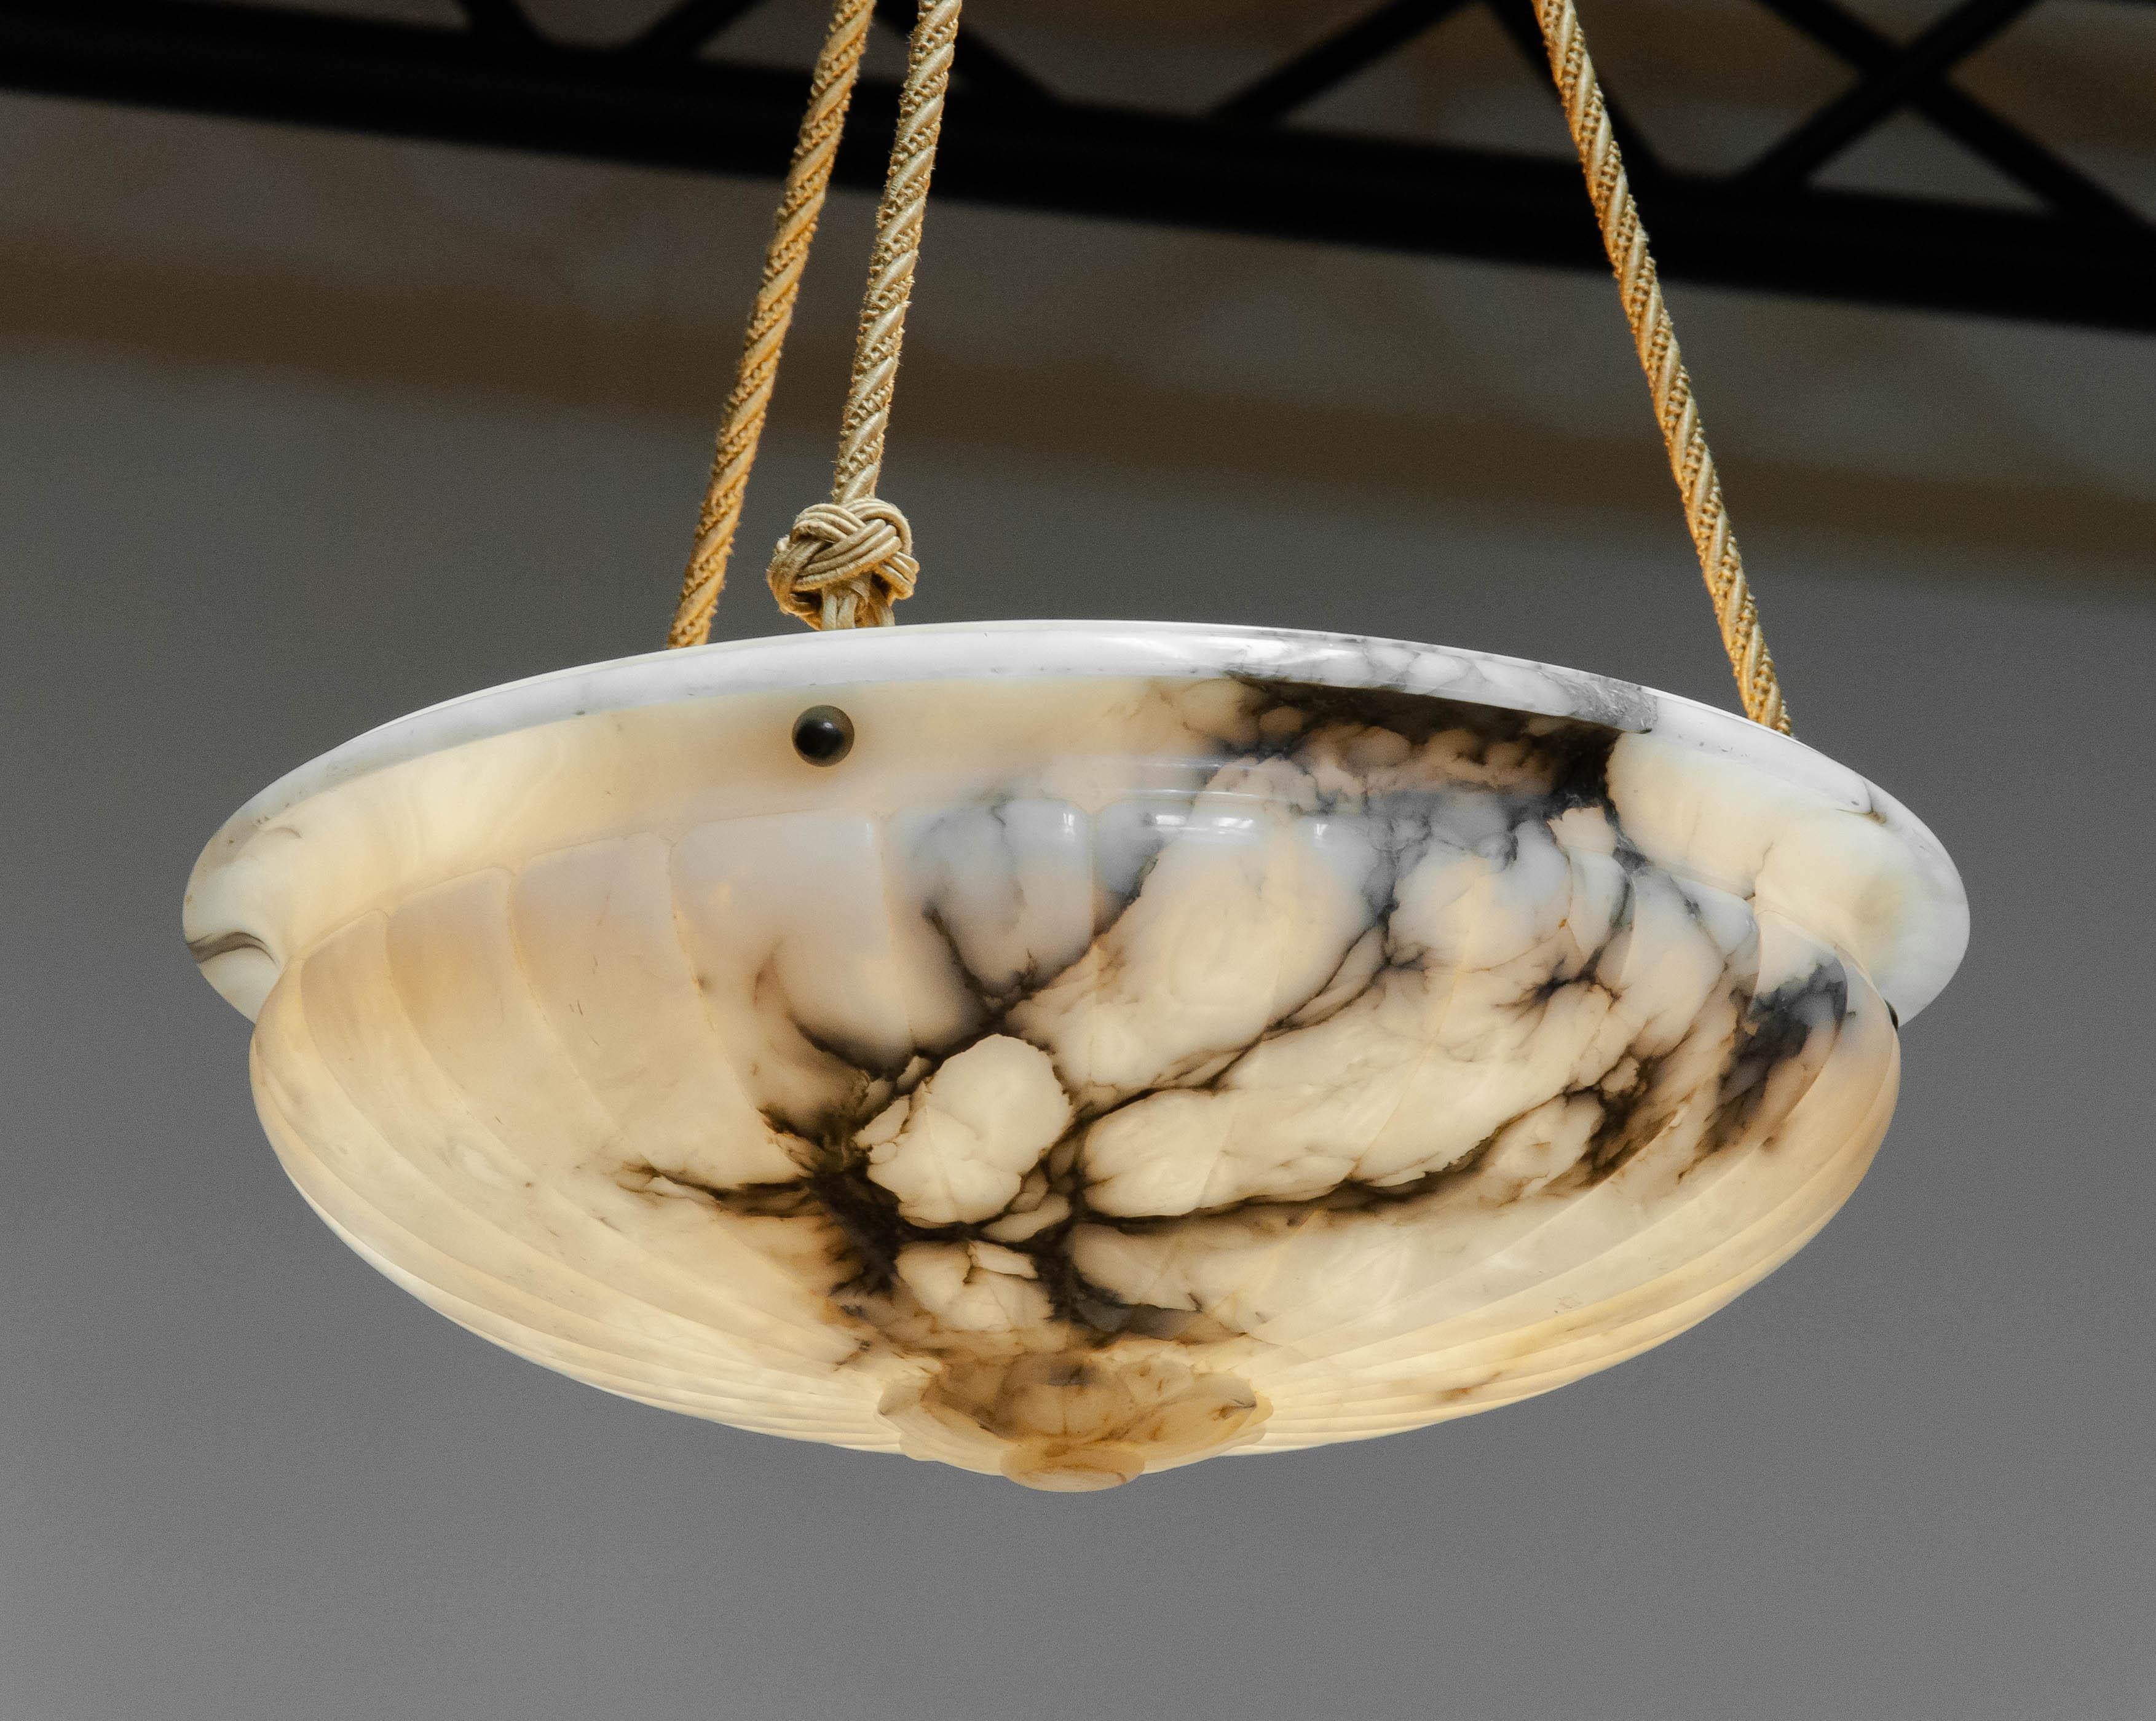 Beautiful alabaster up-light / chandelier made in the 1930s in Sweden. In the centered underneath an engraved flower in Greek style. Using Greek symbols was very popular at that time.
The up-light stil has her original wiring and cords and one screw